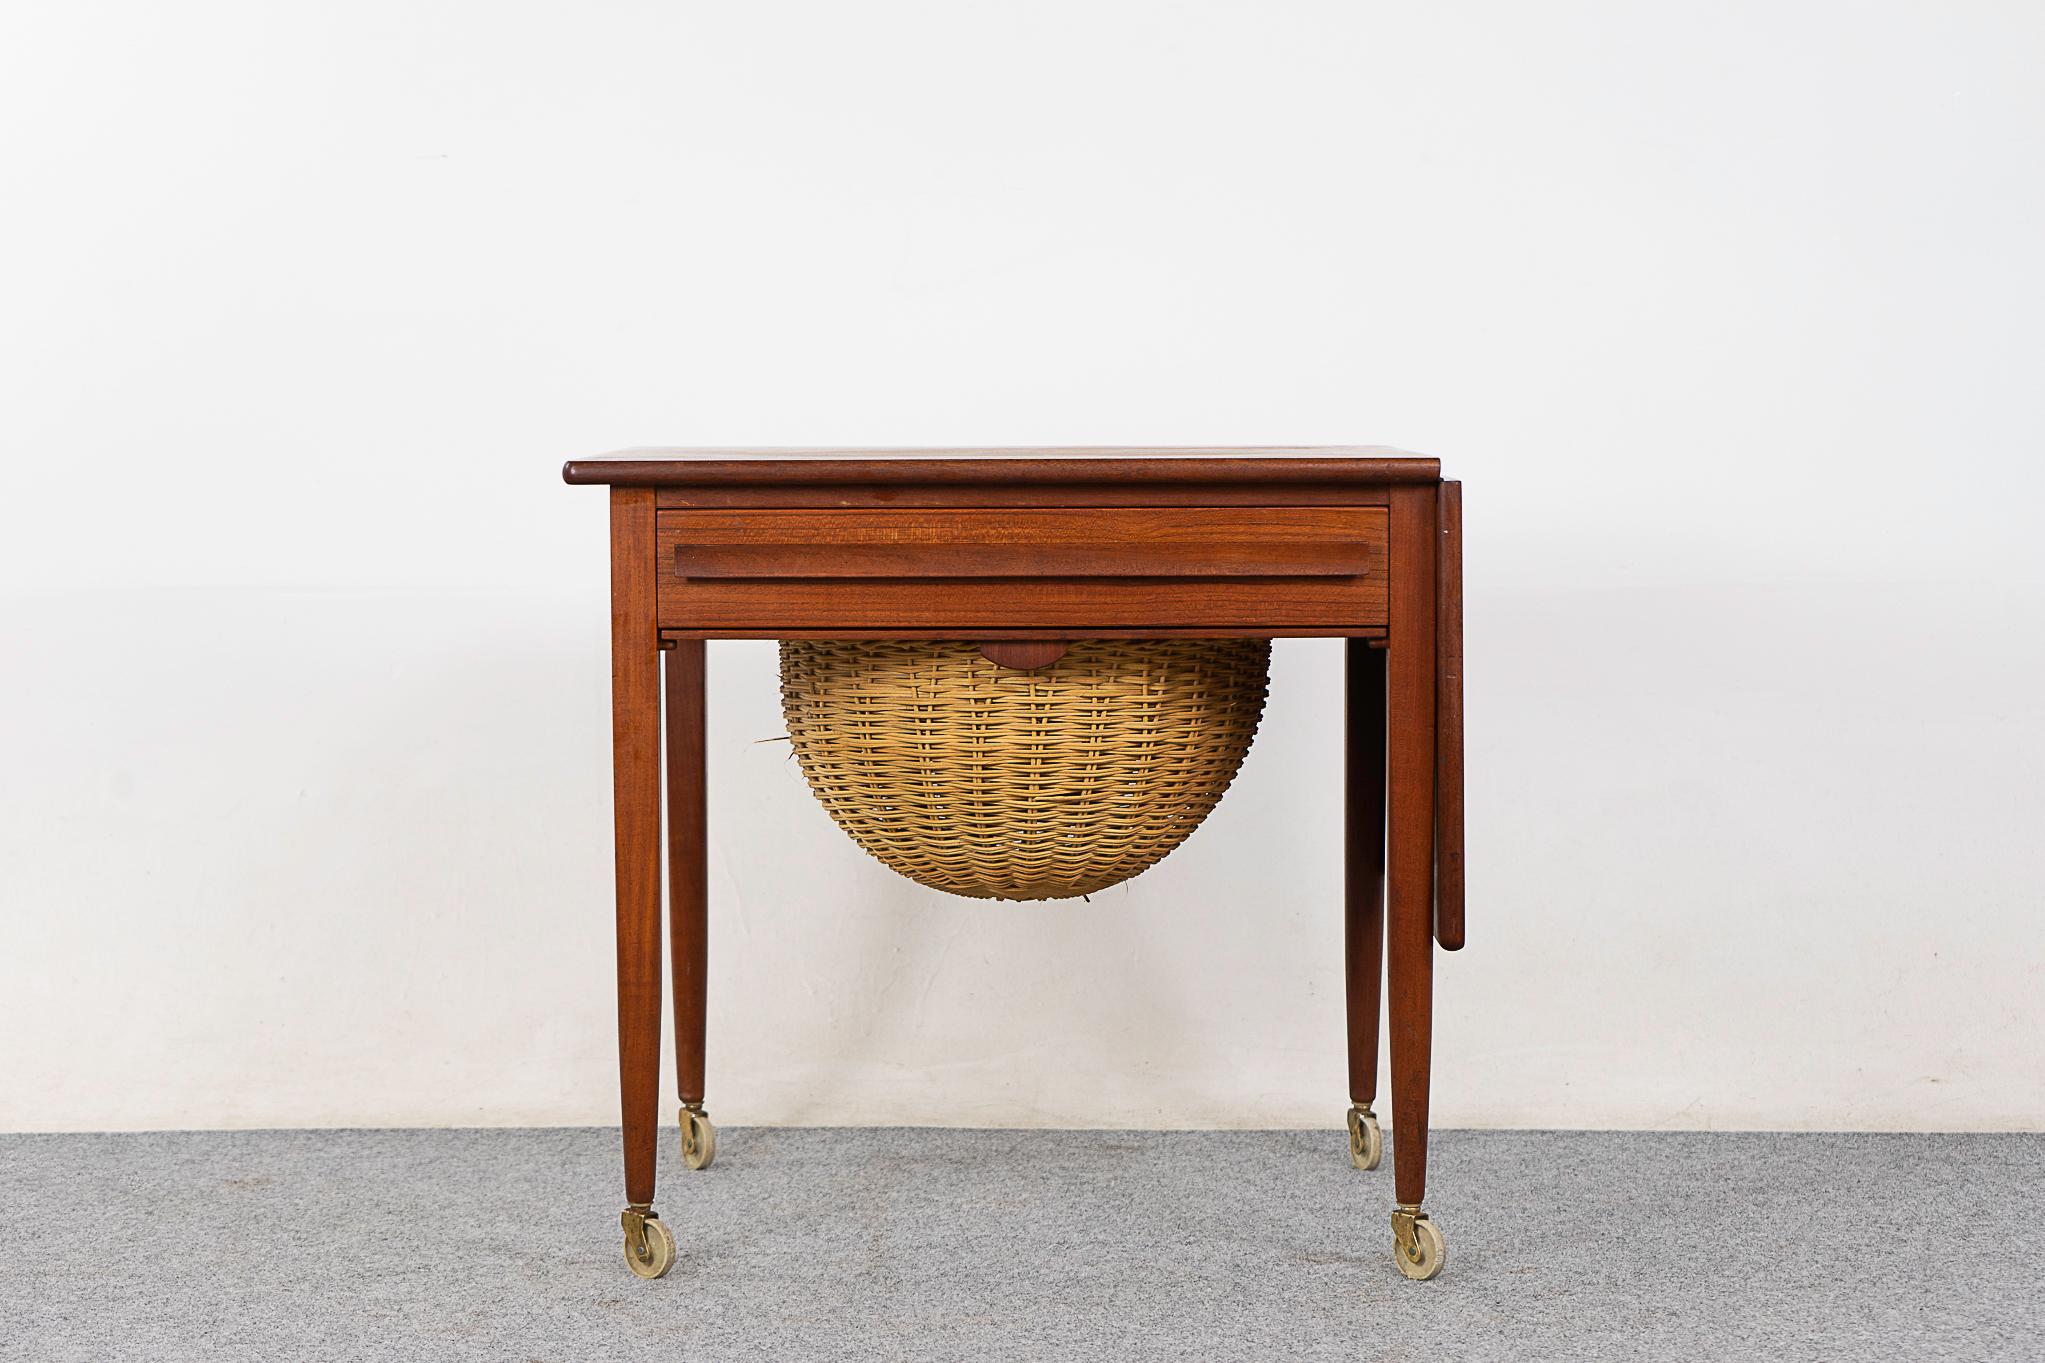 Teak sewing table by Johannes Andersen, circa 1960's.  Designed as a sewing table, this piece offers versatility that goes beyond the sewing room! Perfect as an end table or accent piece. Handy drawer with fitted interior, original woven basket